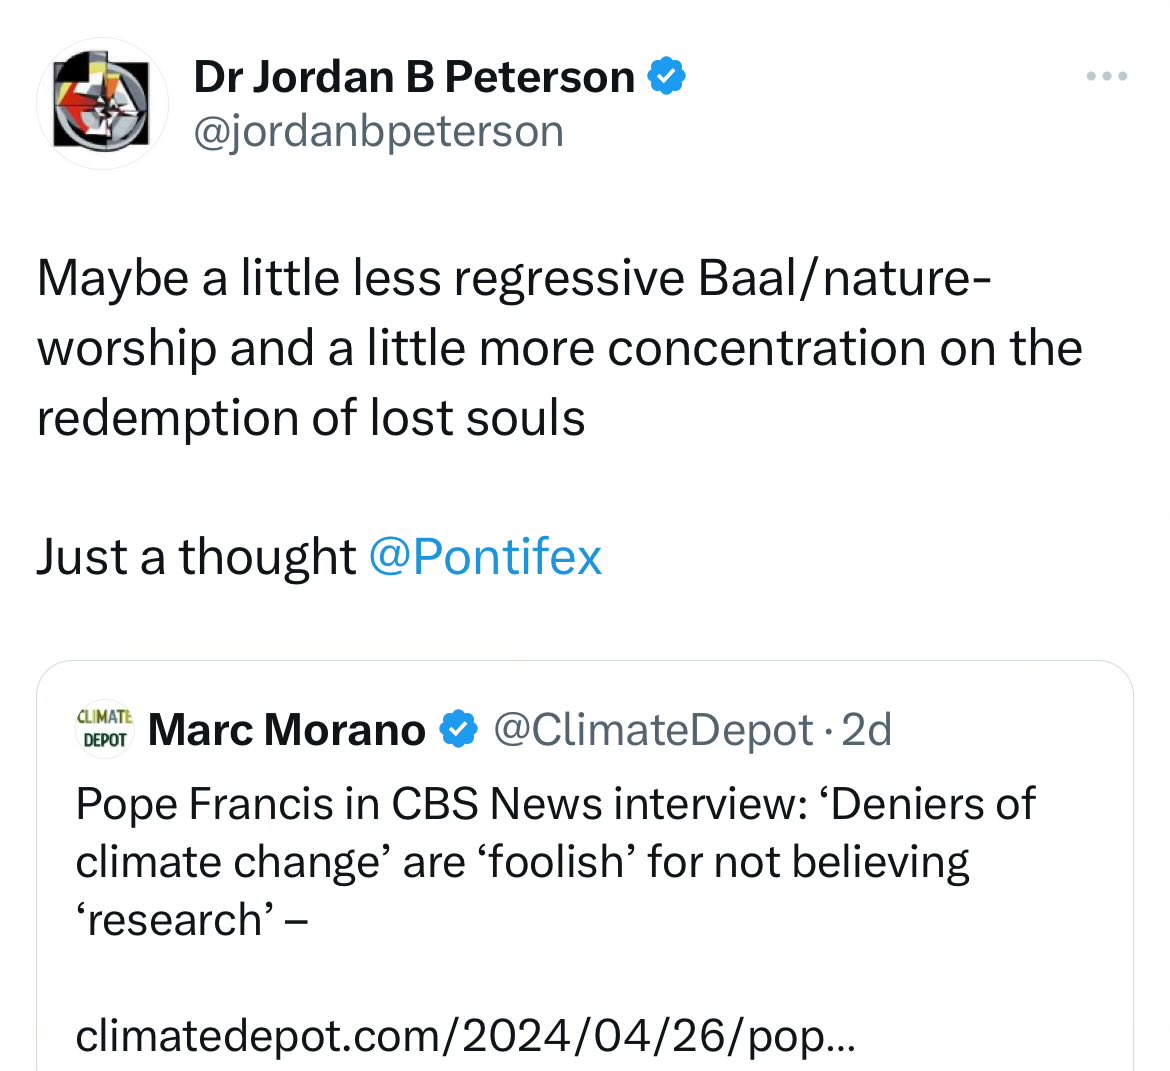 The Daily Wire, Jordan Peterson’s employer, was seeded by the Wilks Brothers who made their fortune in fracking. In case you were wondering why a psychologist thinks climate activism is “Baal worship.”